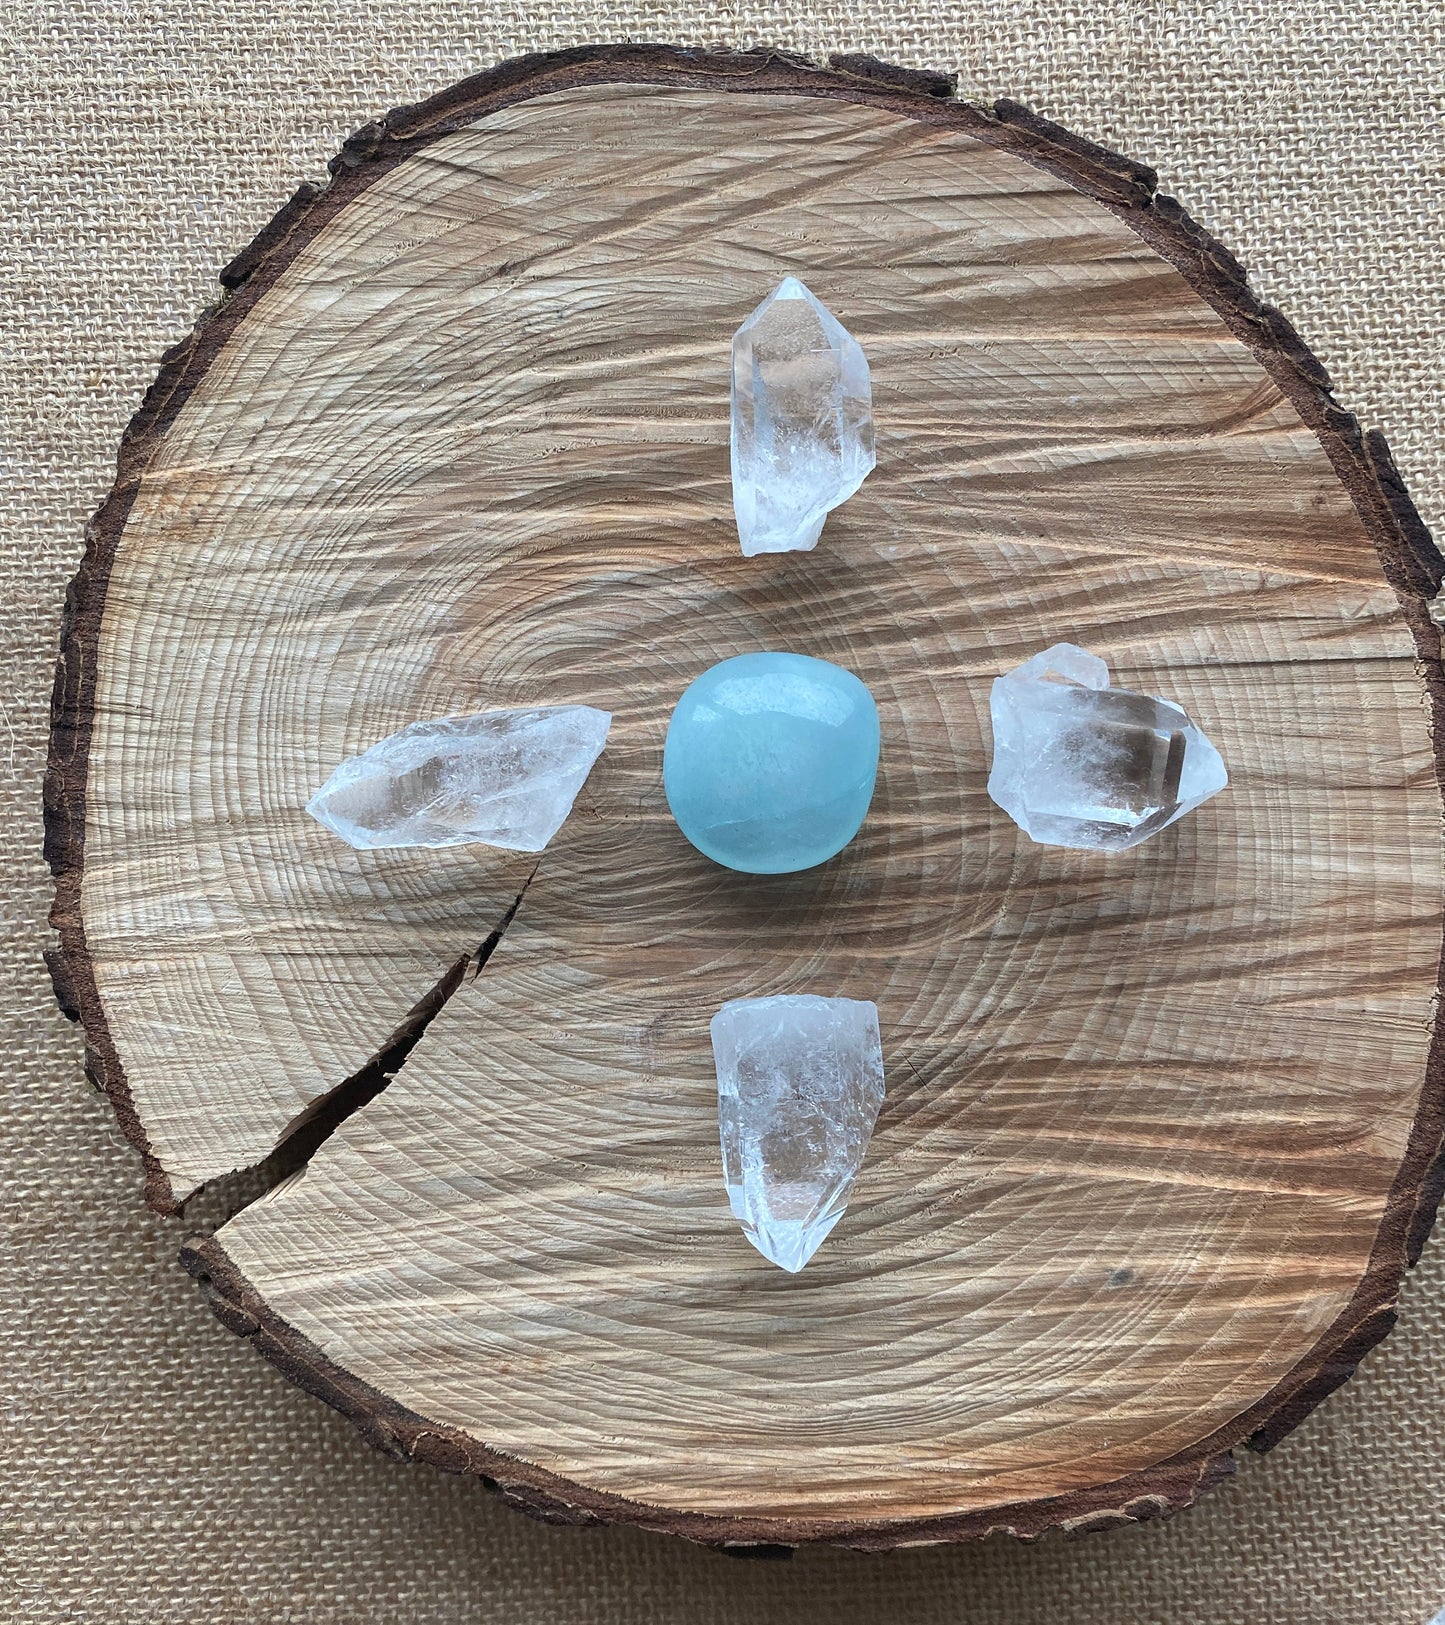 Communication Crystal Kit, Aquamarine tumble [focus] stone and Starbrary Quartz Points to amplify, Intention Setting, Crystal grids